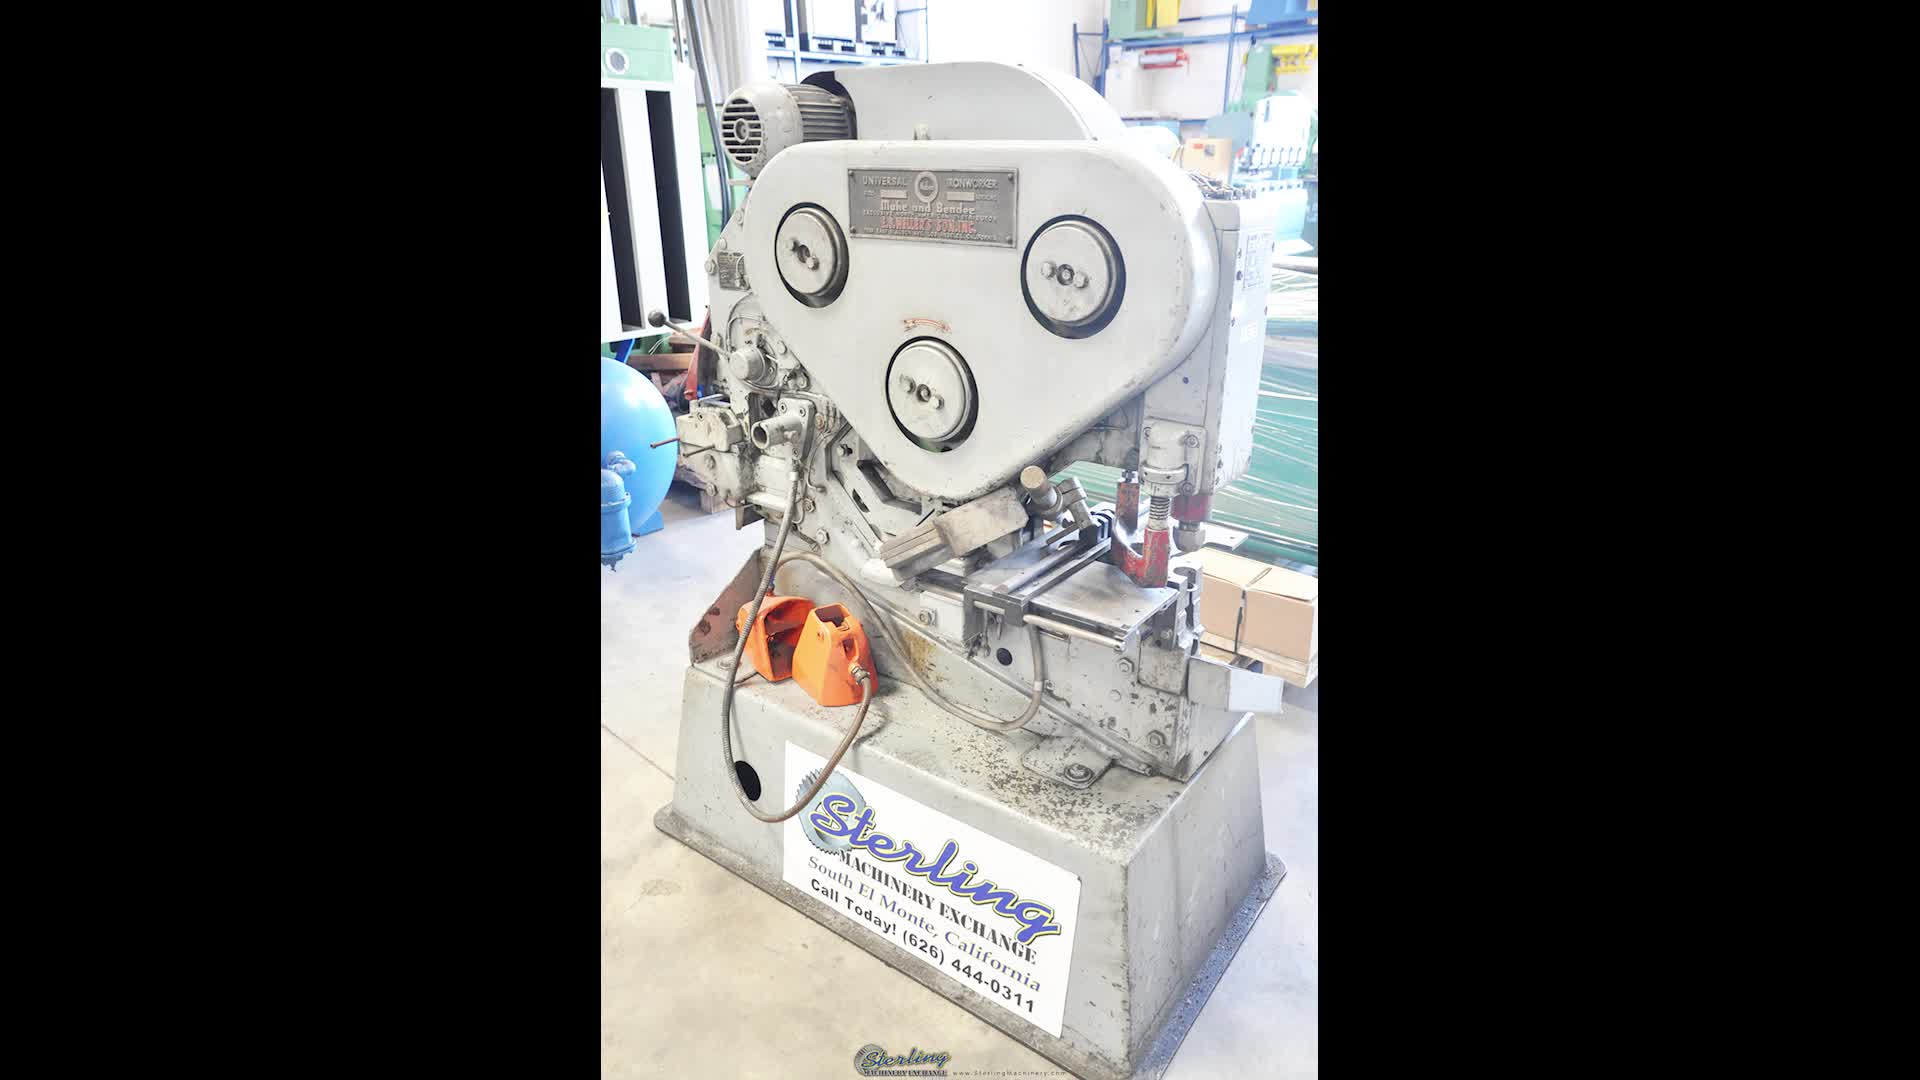 Mubea-38 TON USED MUBEA MECHANICAL IRONWORKER, MDL. KBL-0, MAGNETIC START/STOP PUSH BUTTON, DUAL FOOT PEDAL, BAR SHEAR, COPER NOTCHER ATTACHMENT, PUNCH ATTACHMENT, SECTION SHEAR ATTACHMENT, #A3873-01